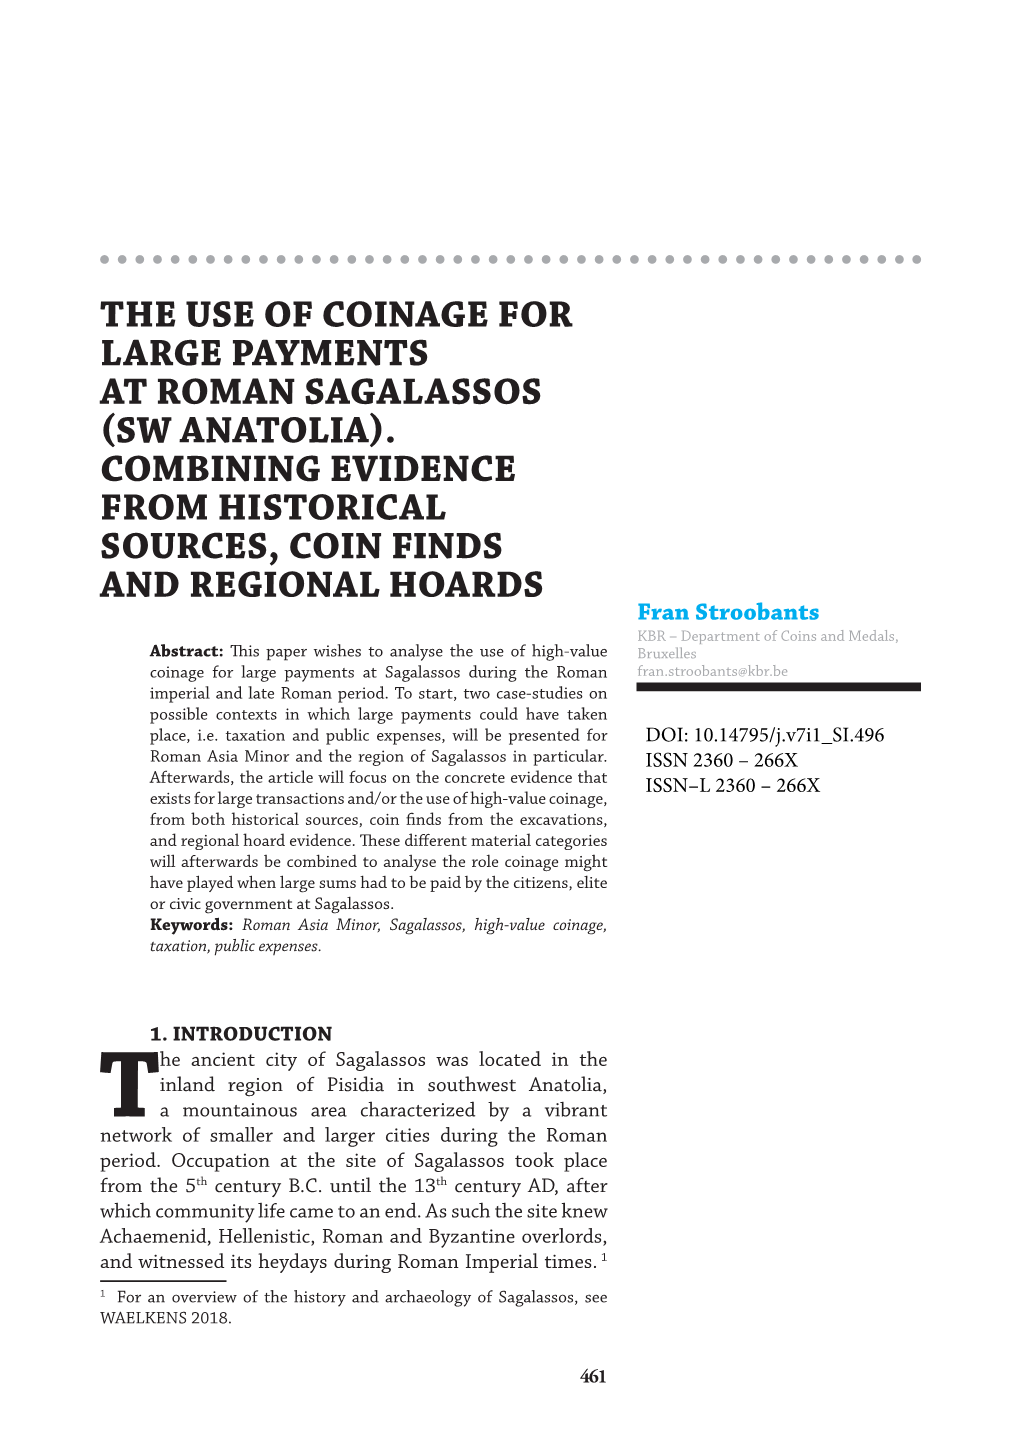 The Use of Coinage for Large Payments at Roman Sagalassos (Sw Anatolia). Combining Evidence from Historical Sources, Coin Finds